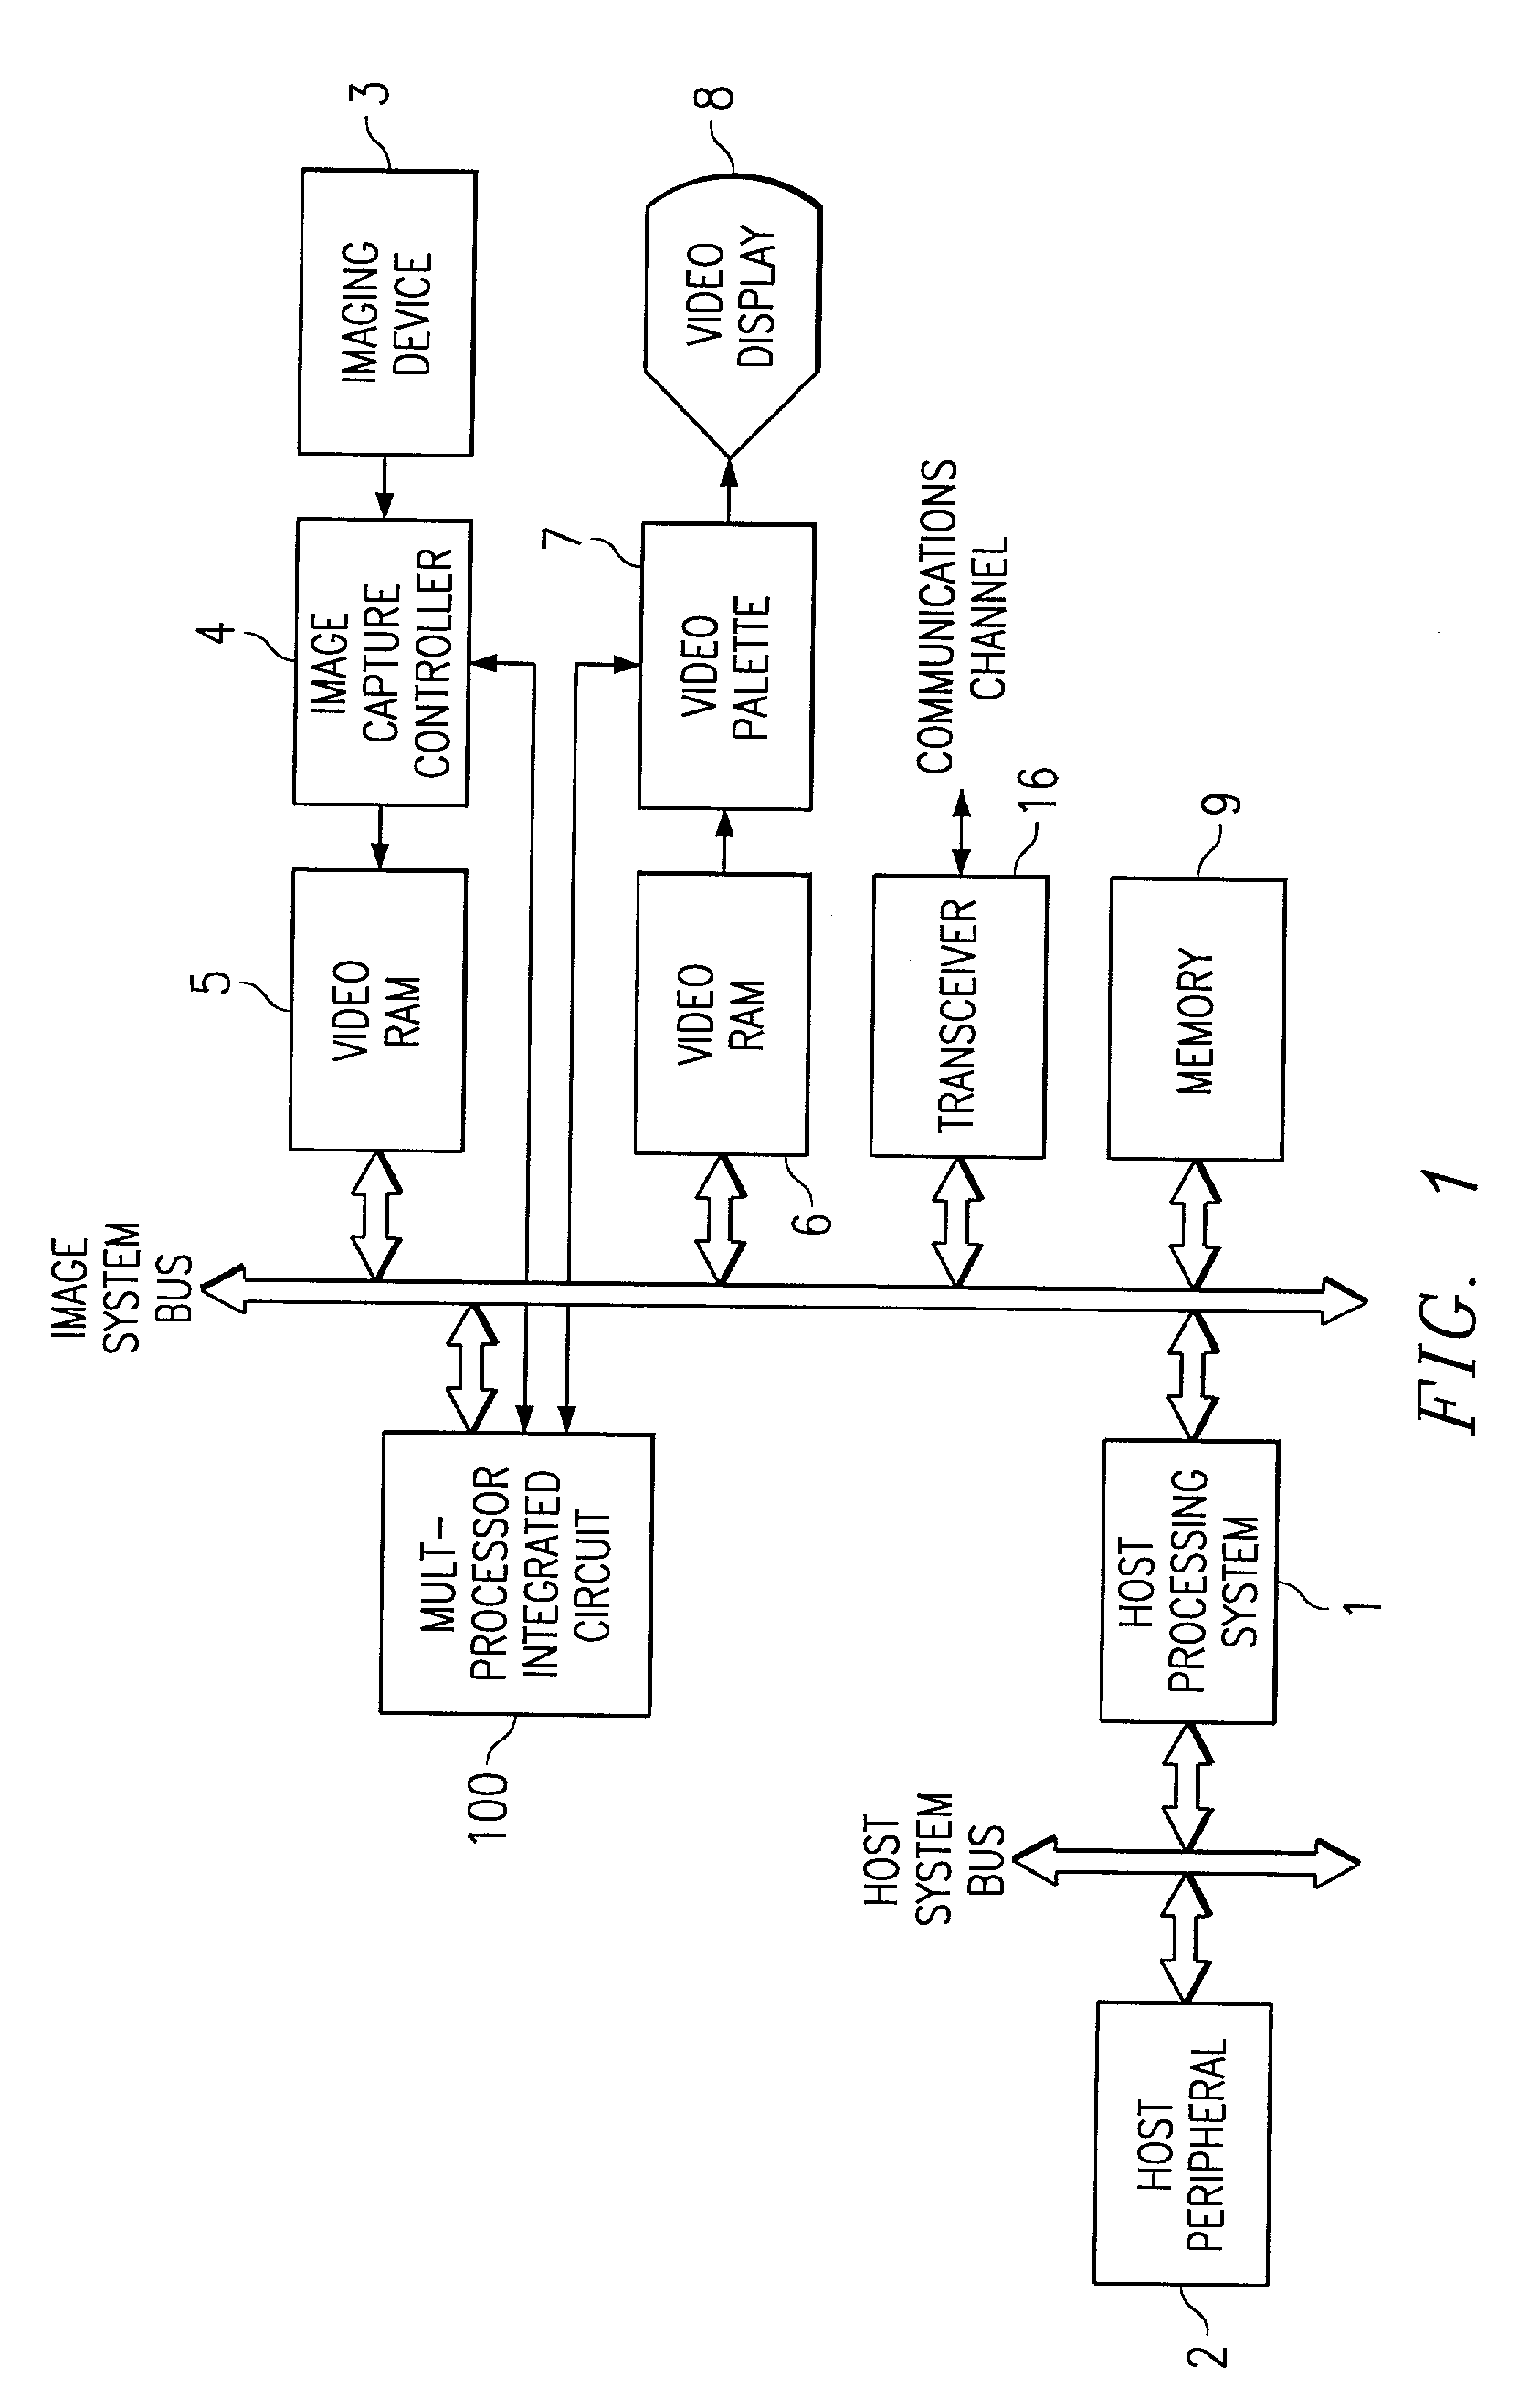 Long instruction word controlling plural independent processor operations